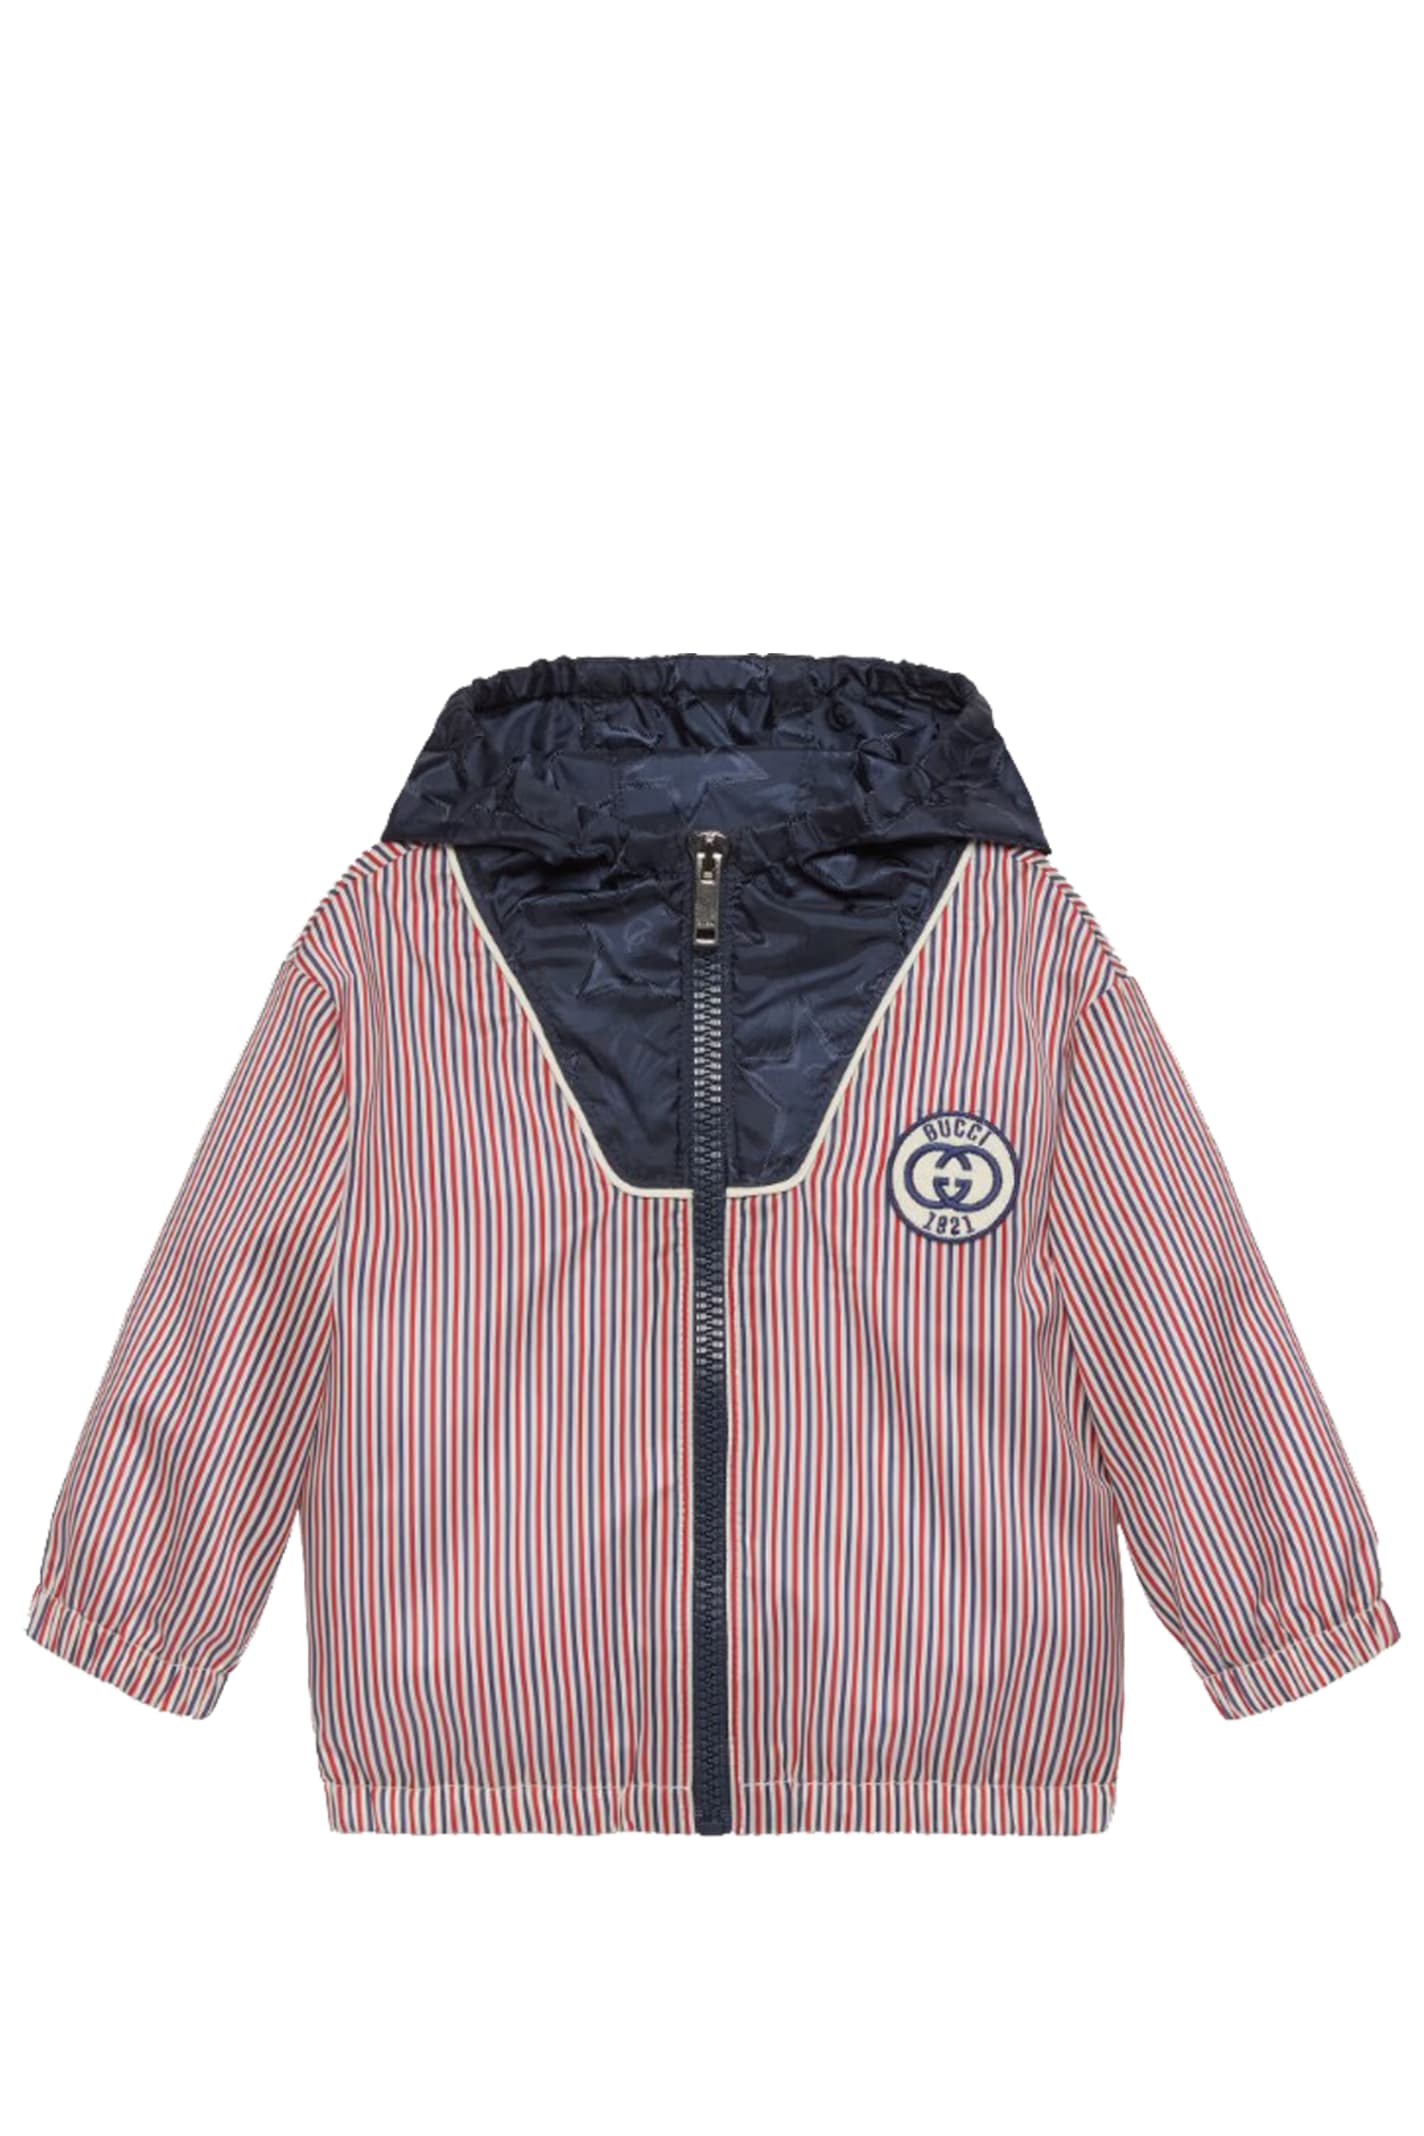 Gucci Kids' Newborn Jacket With Hood In Multicolor